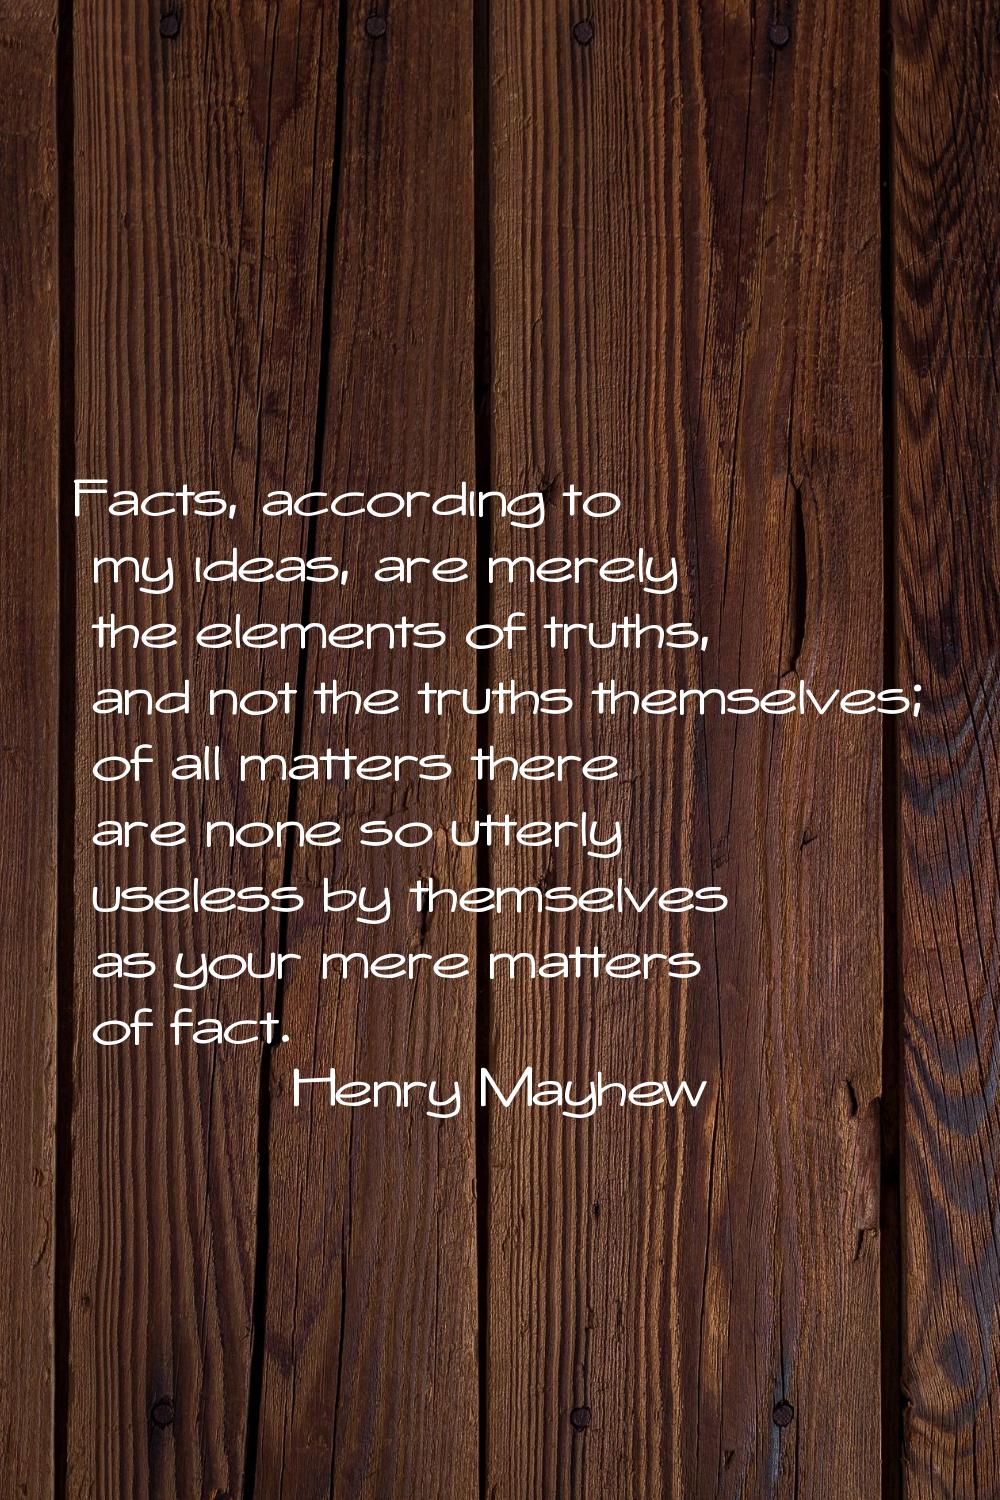 Facts, according to my ideas, are merely the elements of truths, and not the truths themselves; of 